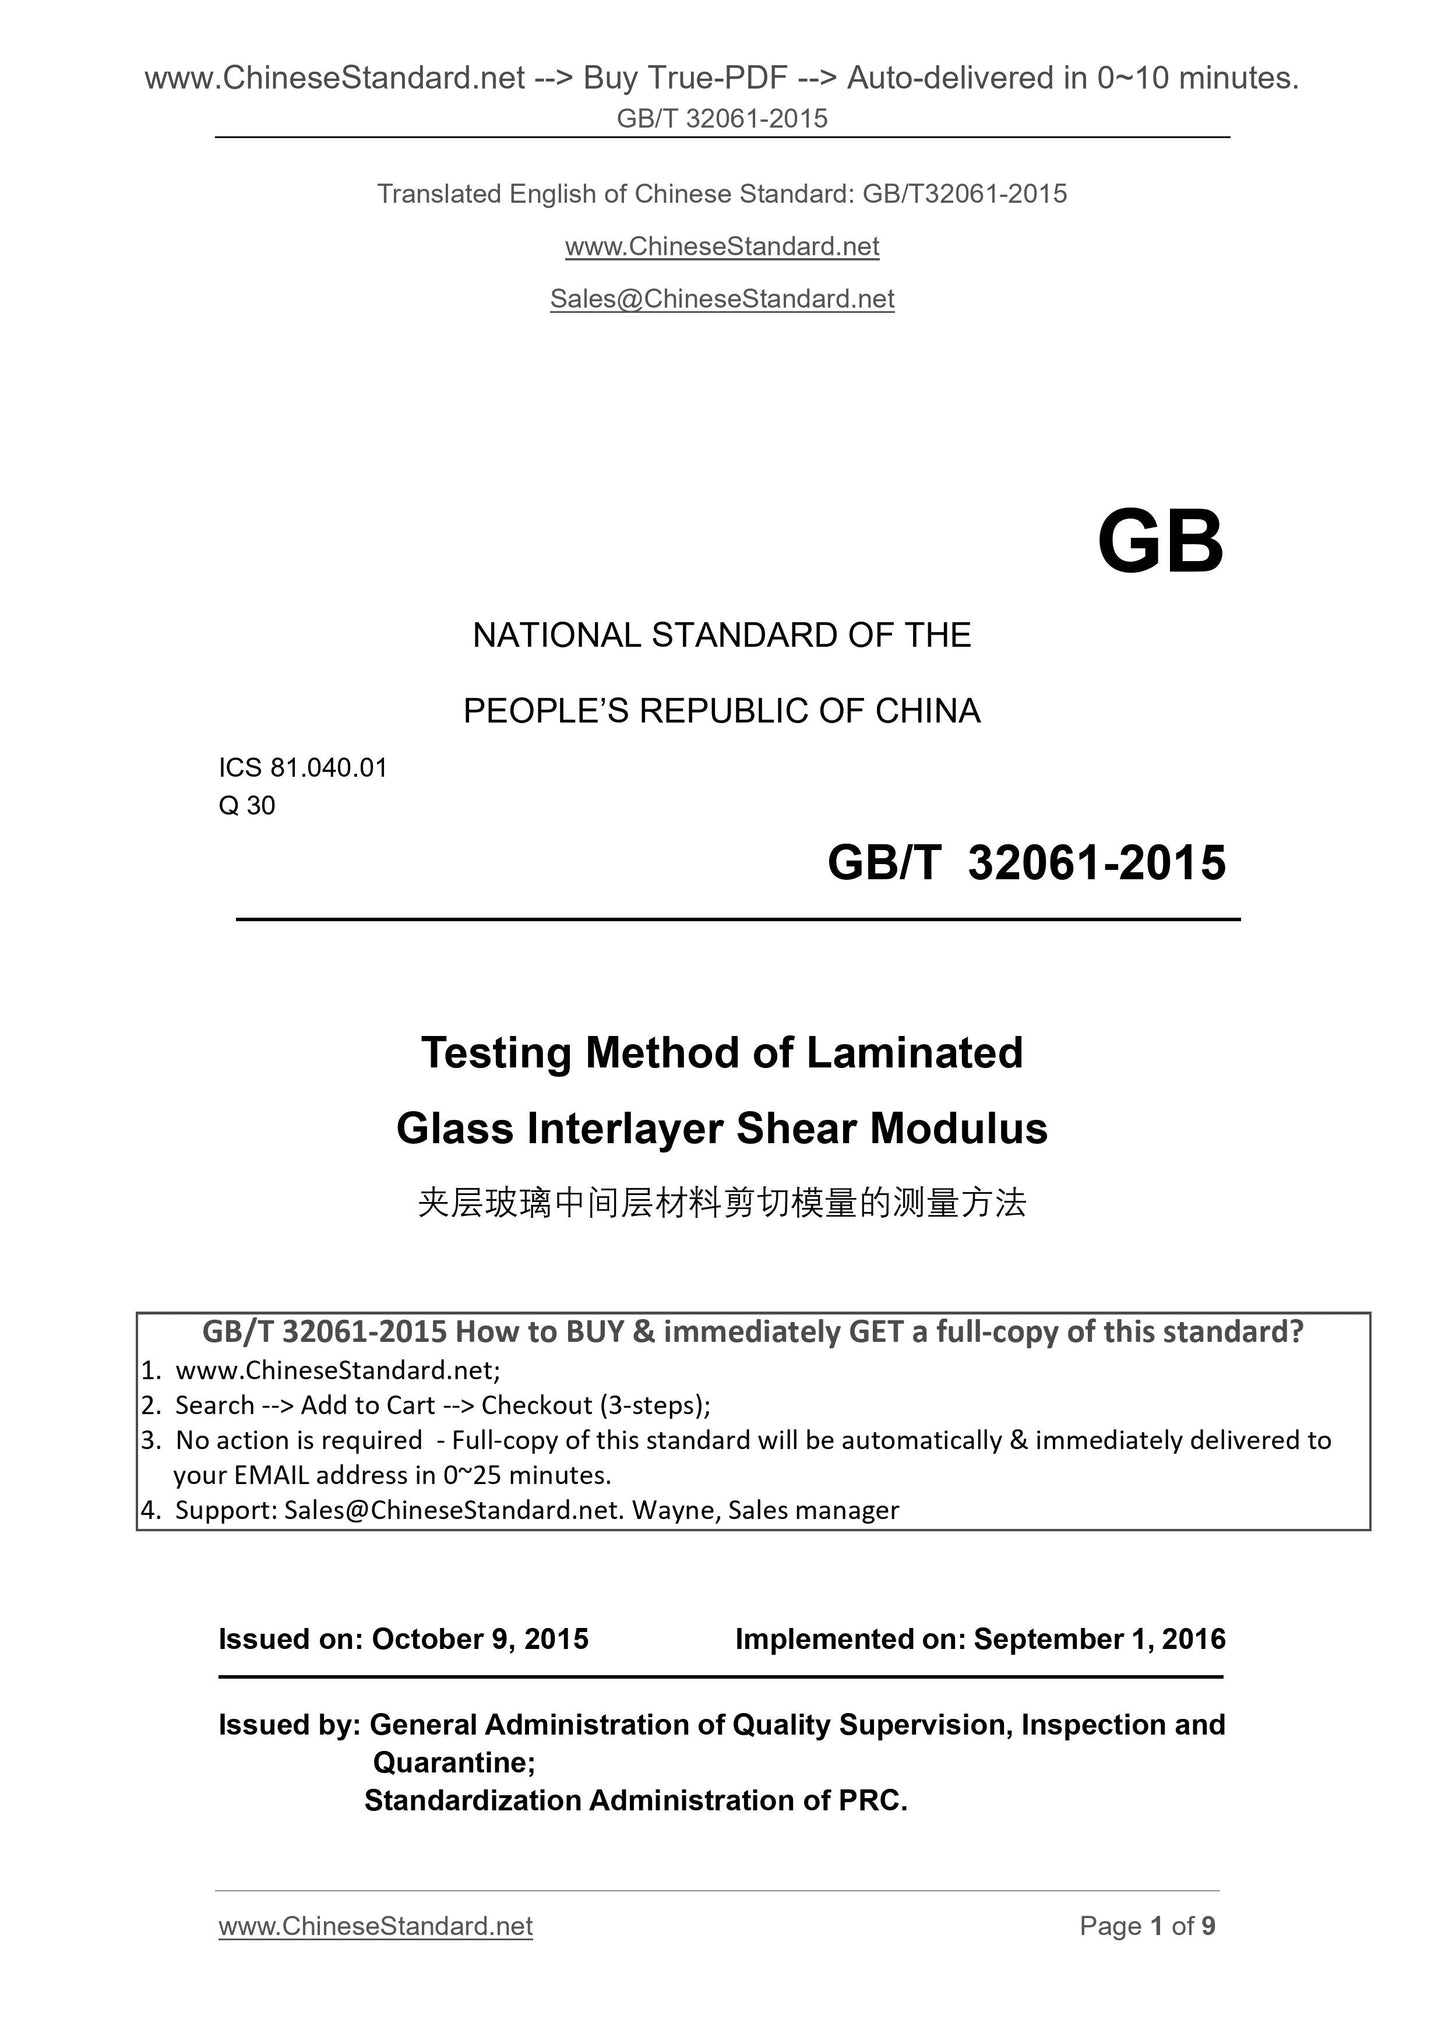 GB/T 32061-2015 Page 1